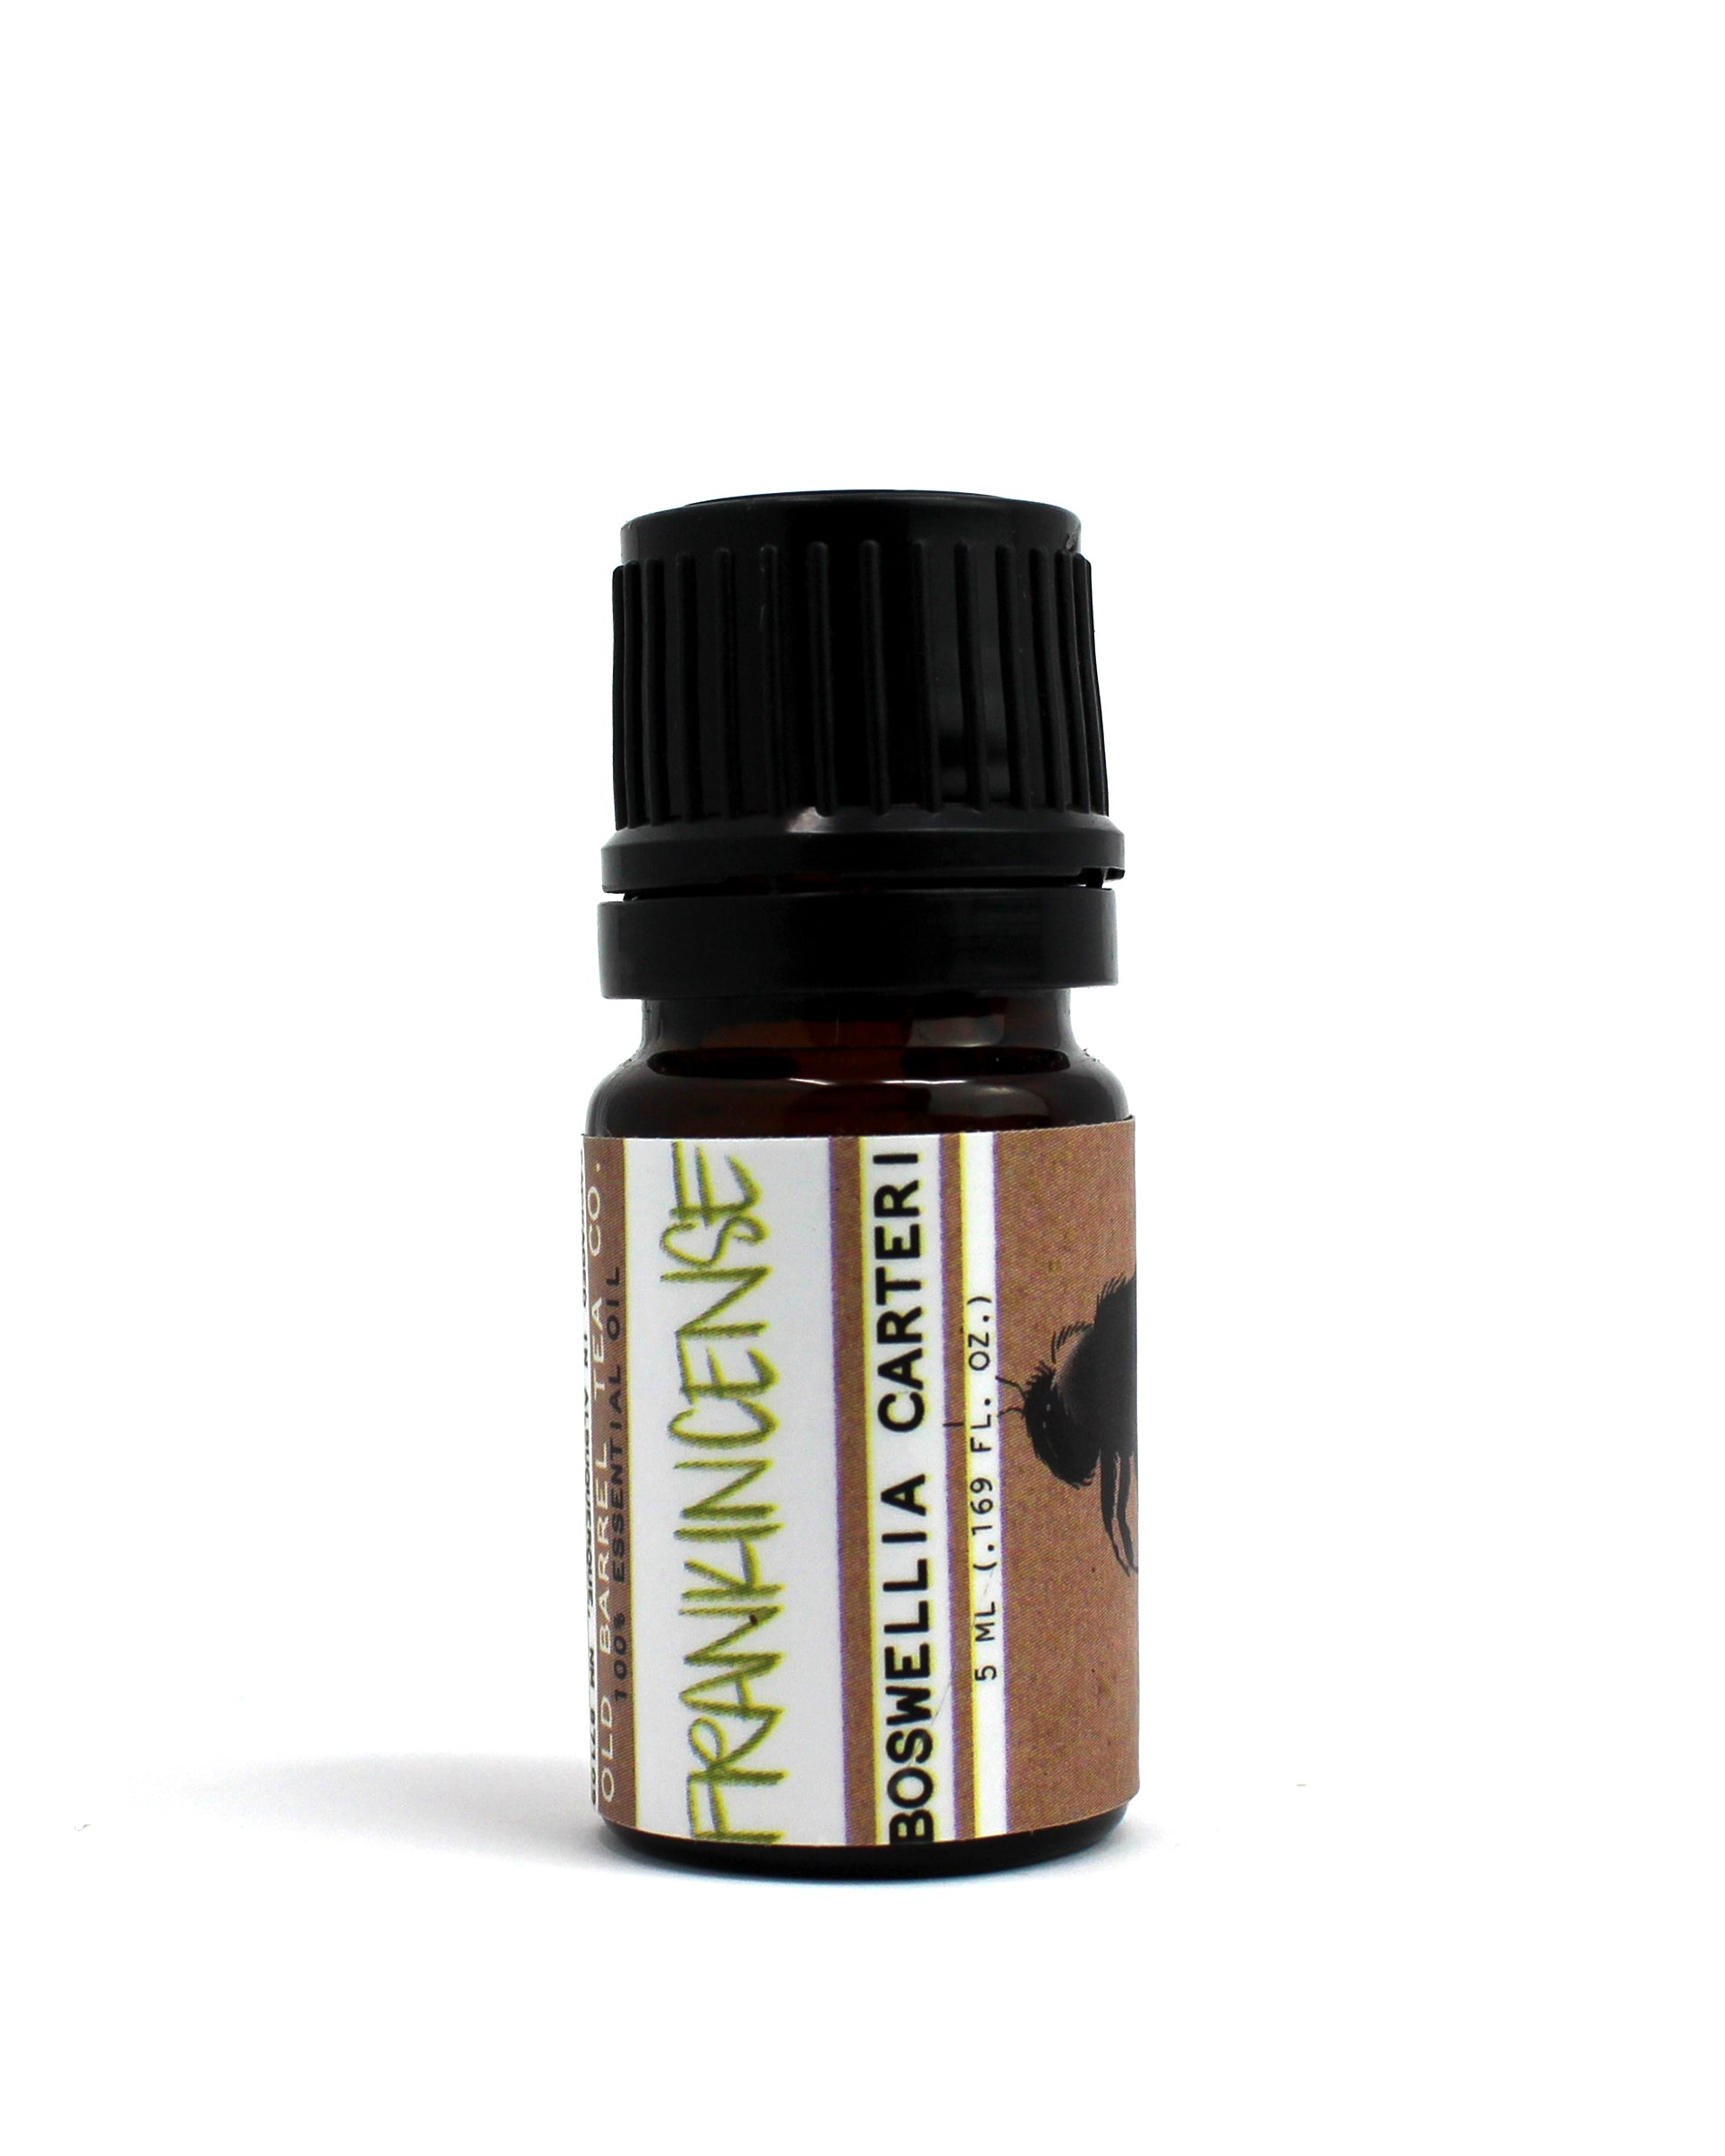 The Campfire Essential Oil Blend